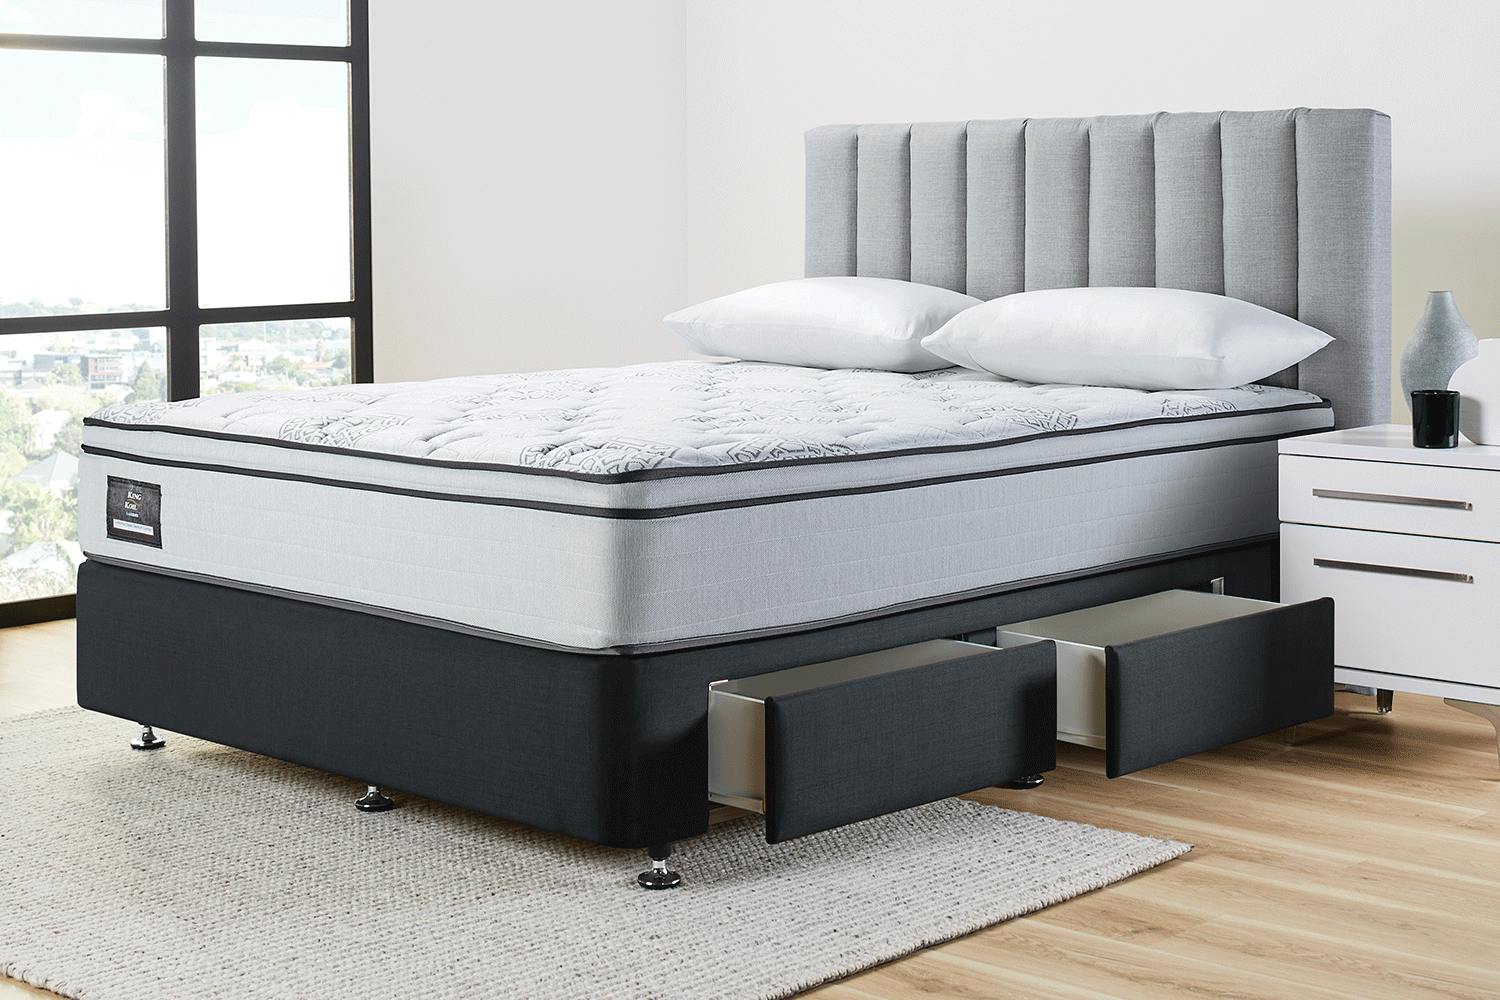 Conforma Classic Medium Super King Bed With Drawer Base by King Koil